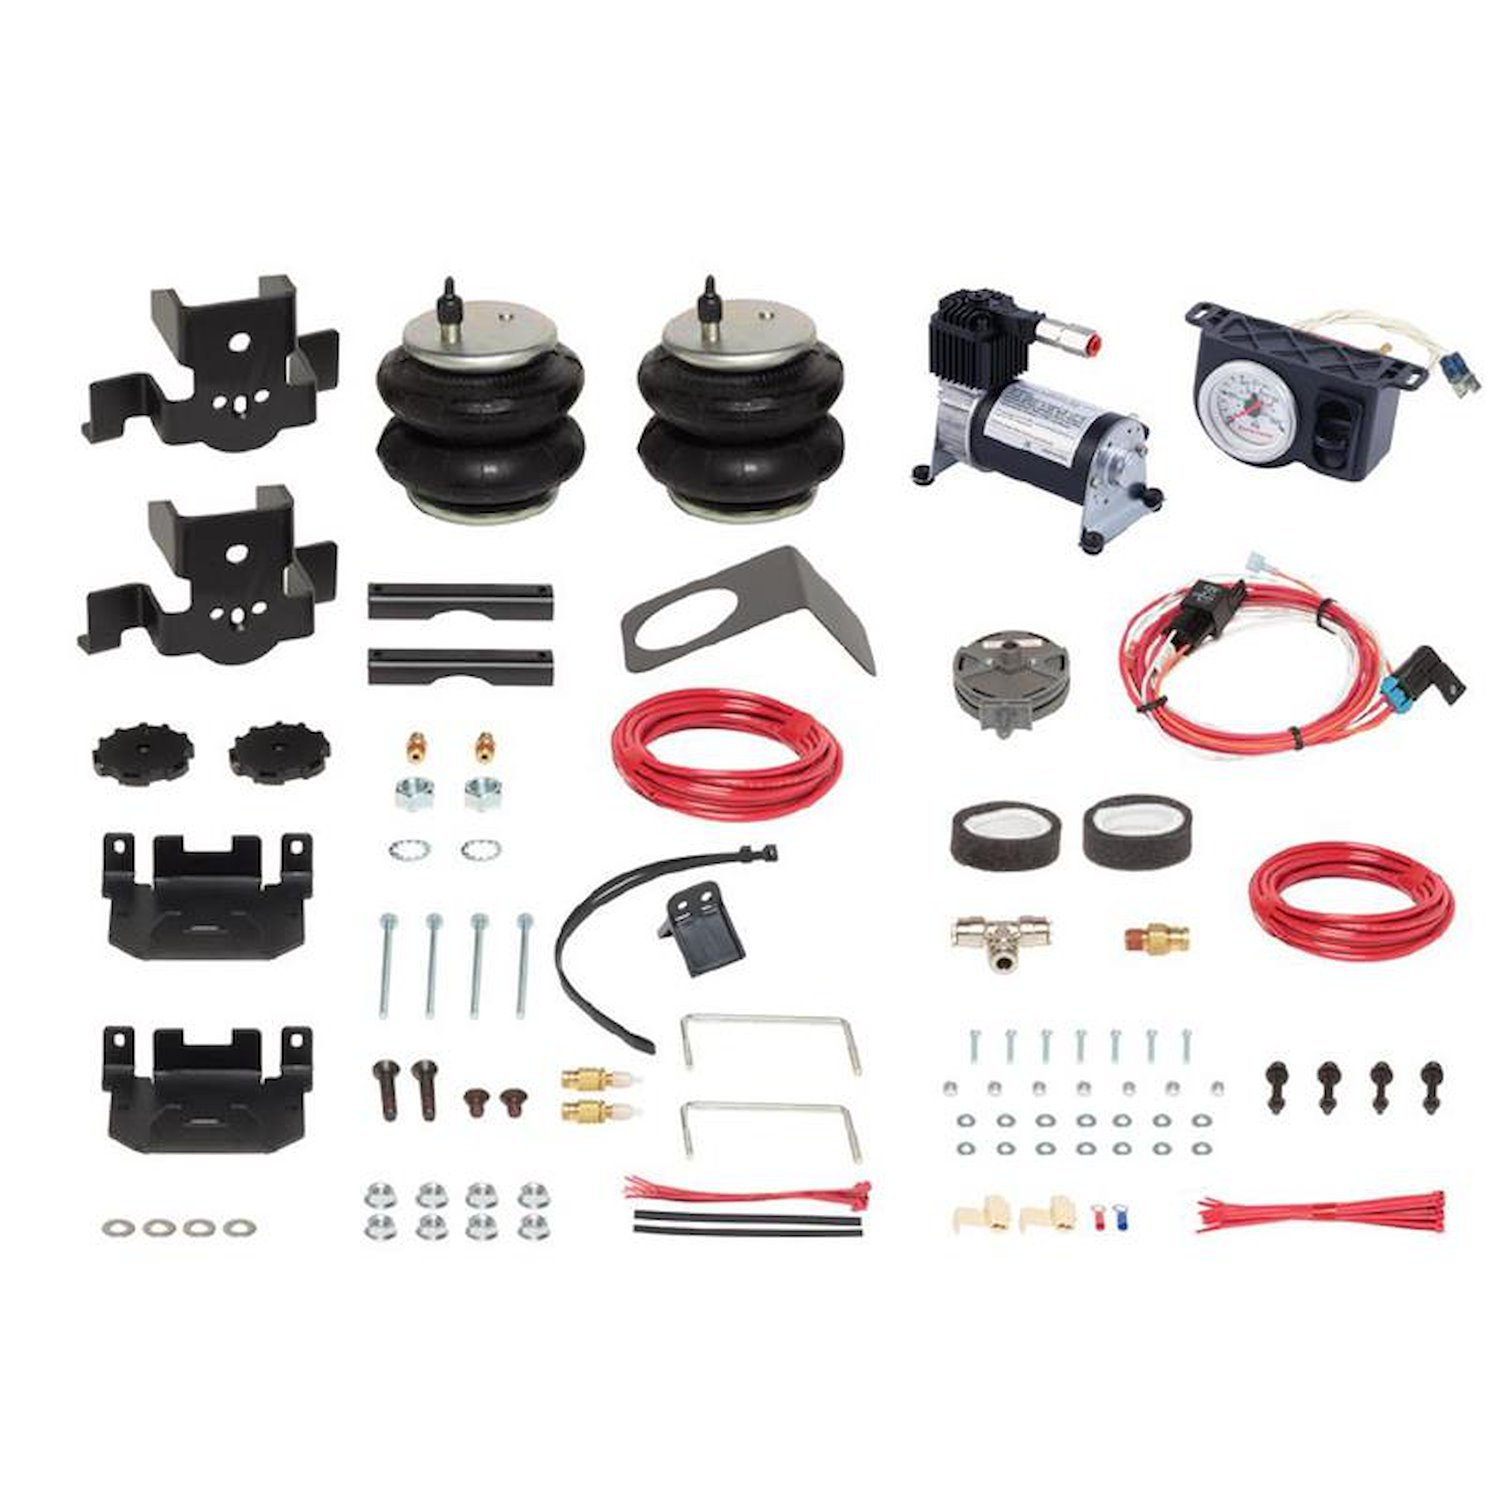 Ride-Rite Analog All-In-One Spring Kit for 2011-2016 Ford F-250/F-350